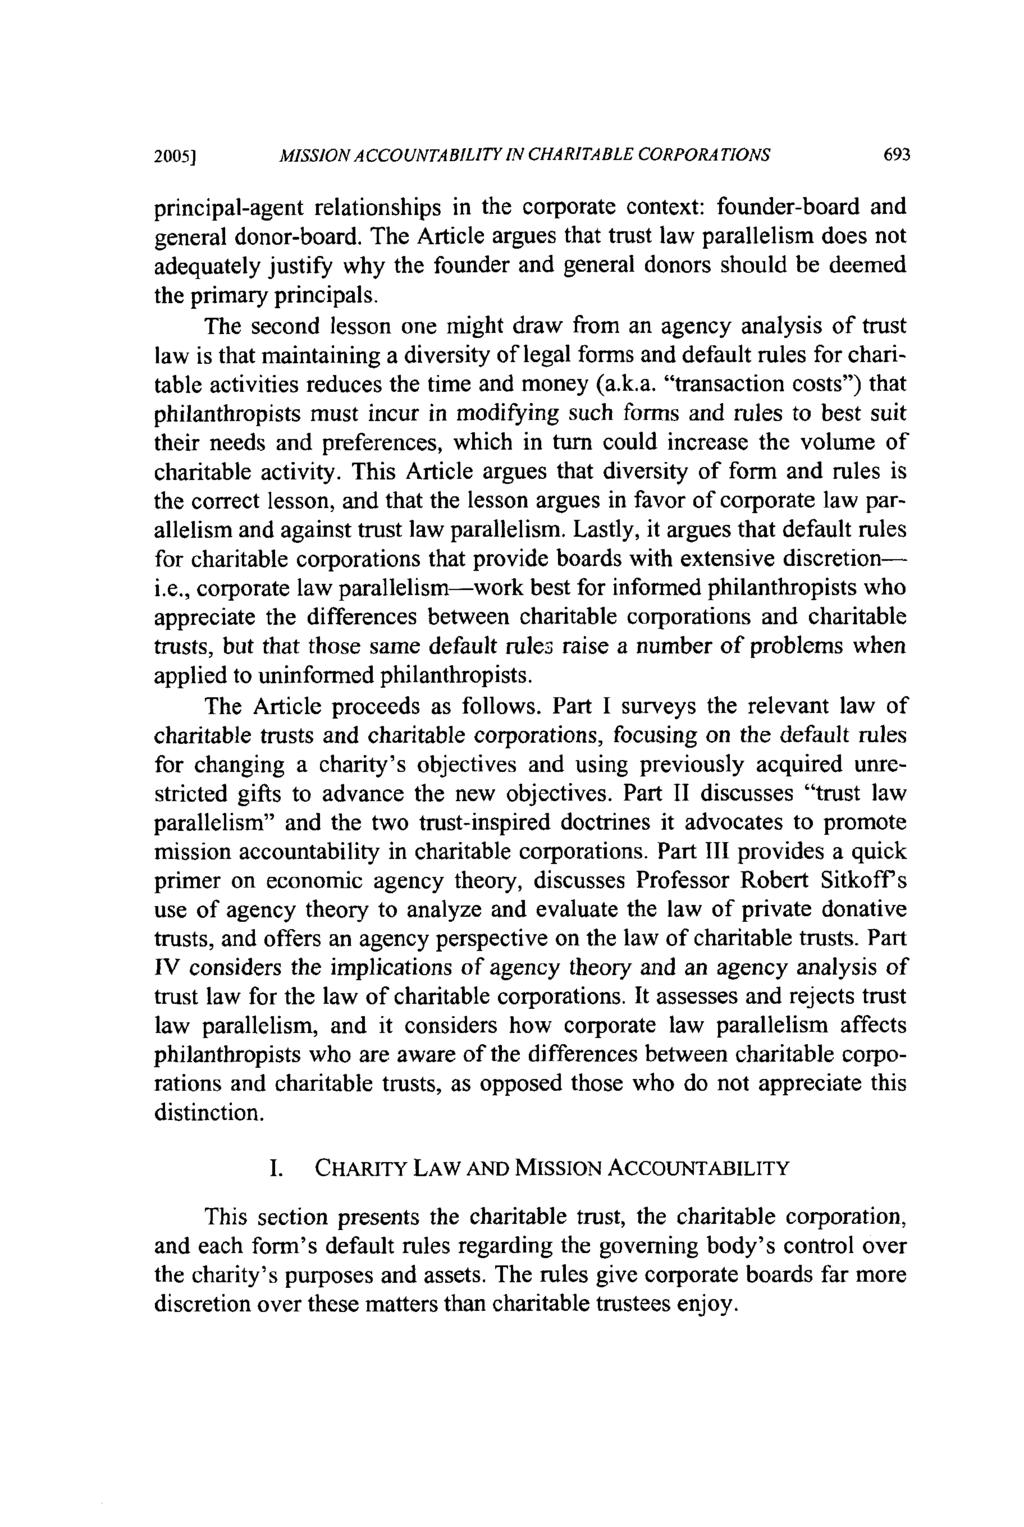 2005] MISSION ACCOUNTABILITY IN CHARITABLE CORPORA TIONS principal-agent relationships in the corporate context: founder-board and general donor-board.